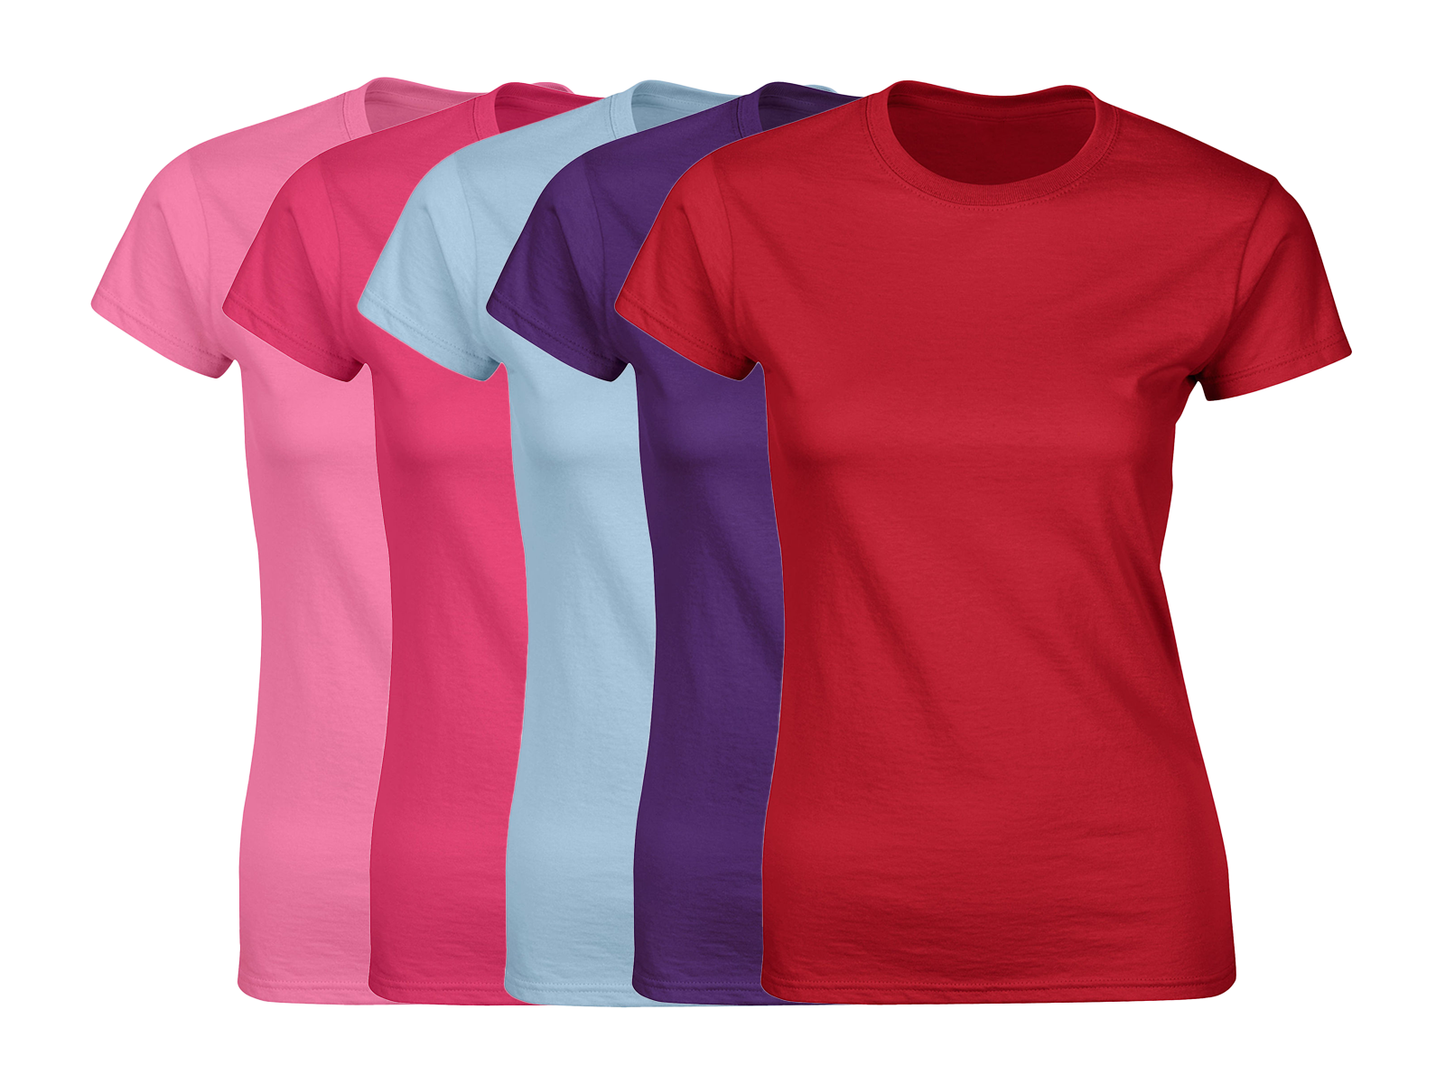 COOZO Ladies Soft Cotton Pack of 5 Plain Short Sleeve T-Shirts - COOZO